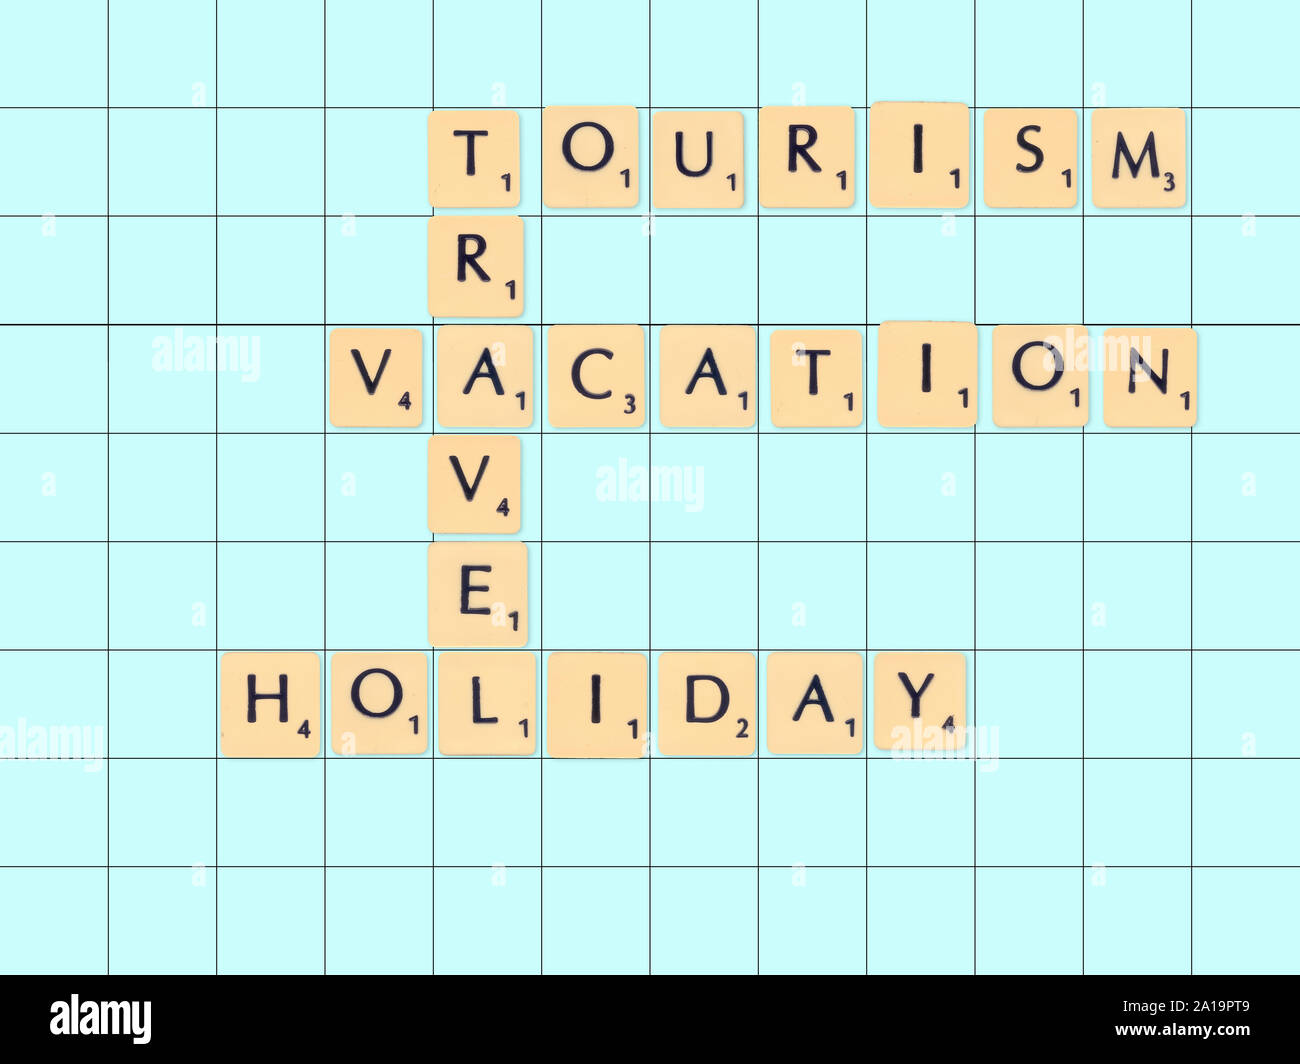 Digitally created Scrabble tiles on a board spelling out Travel tourism and holiday concepts Stock Photo